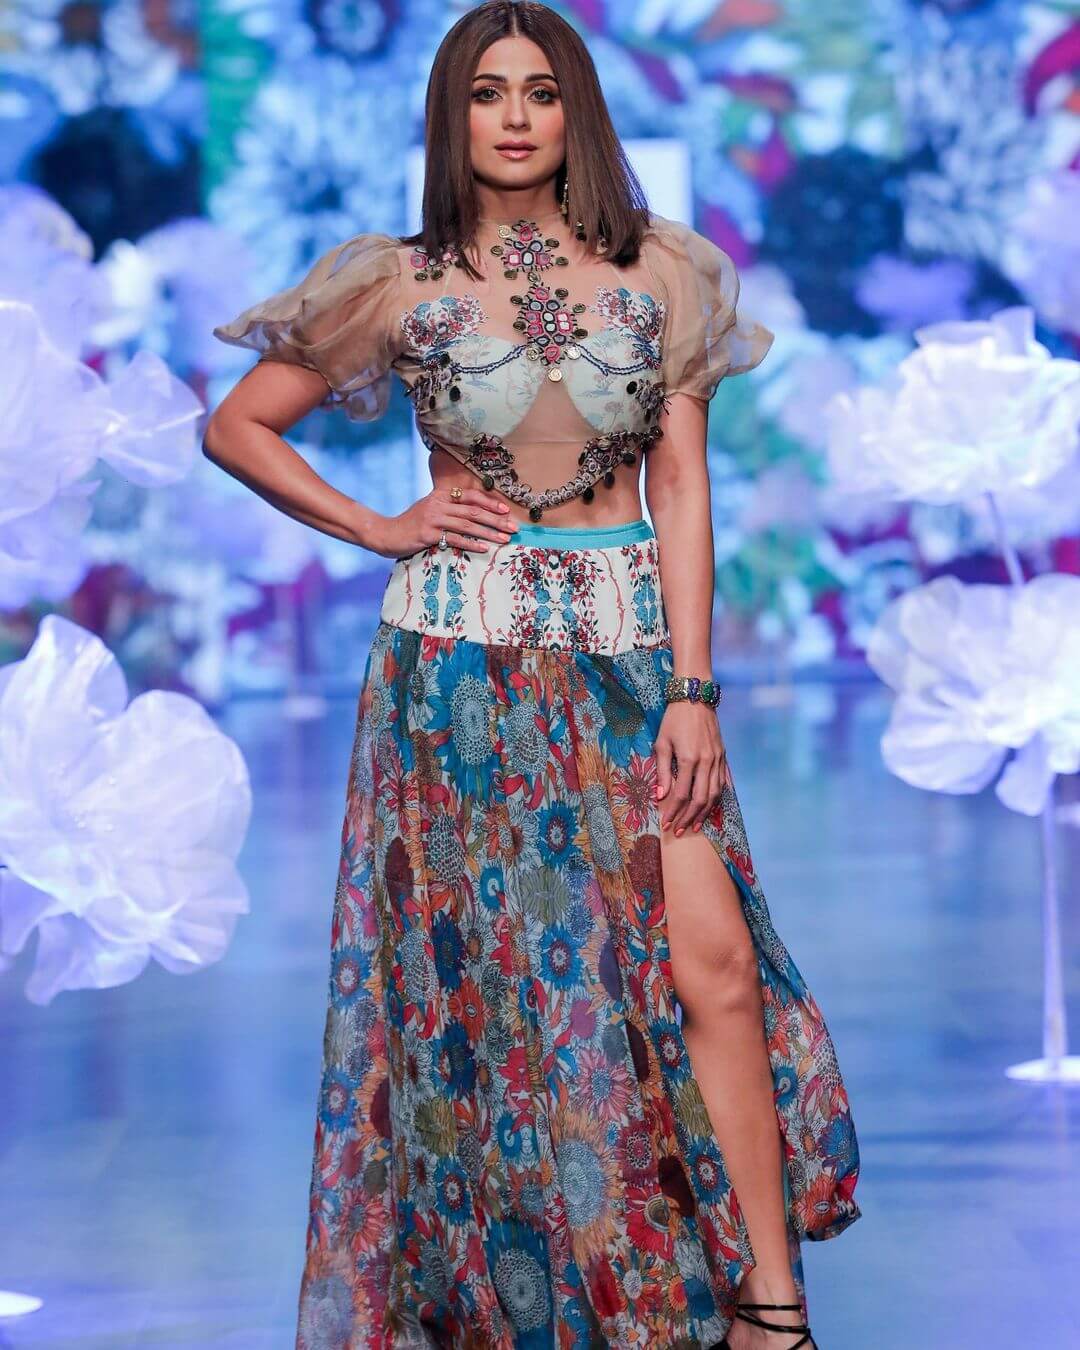 Lakme Fashion Week Bollywood Celebrities Spotted At The Runway - Shamita Shetty's Glamorous Look In Floral Print Fabulous Dress